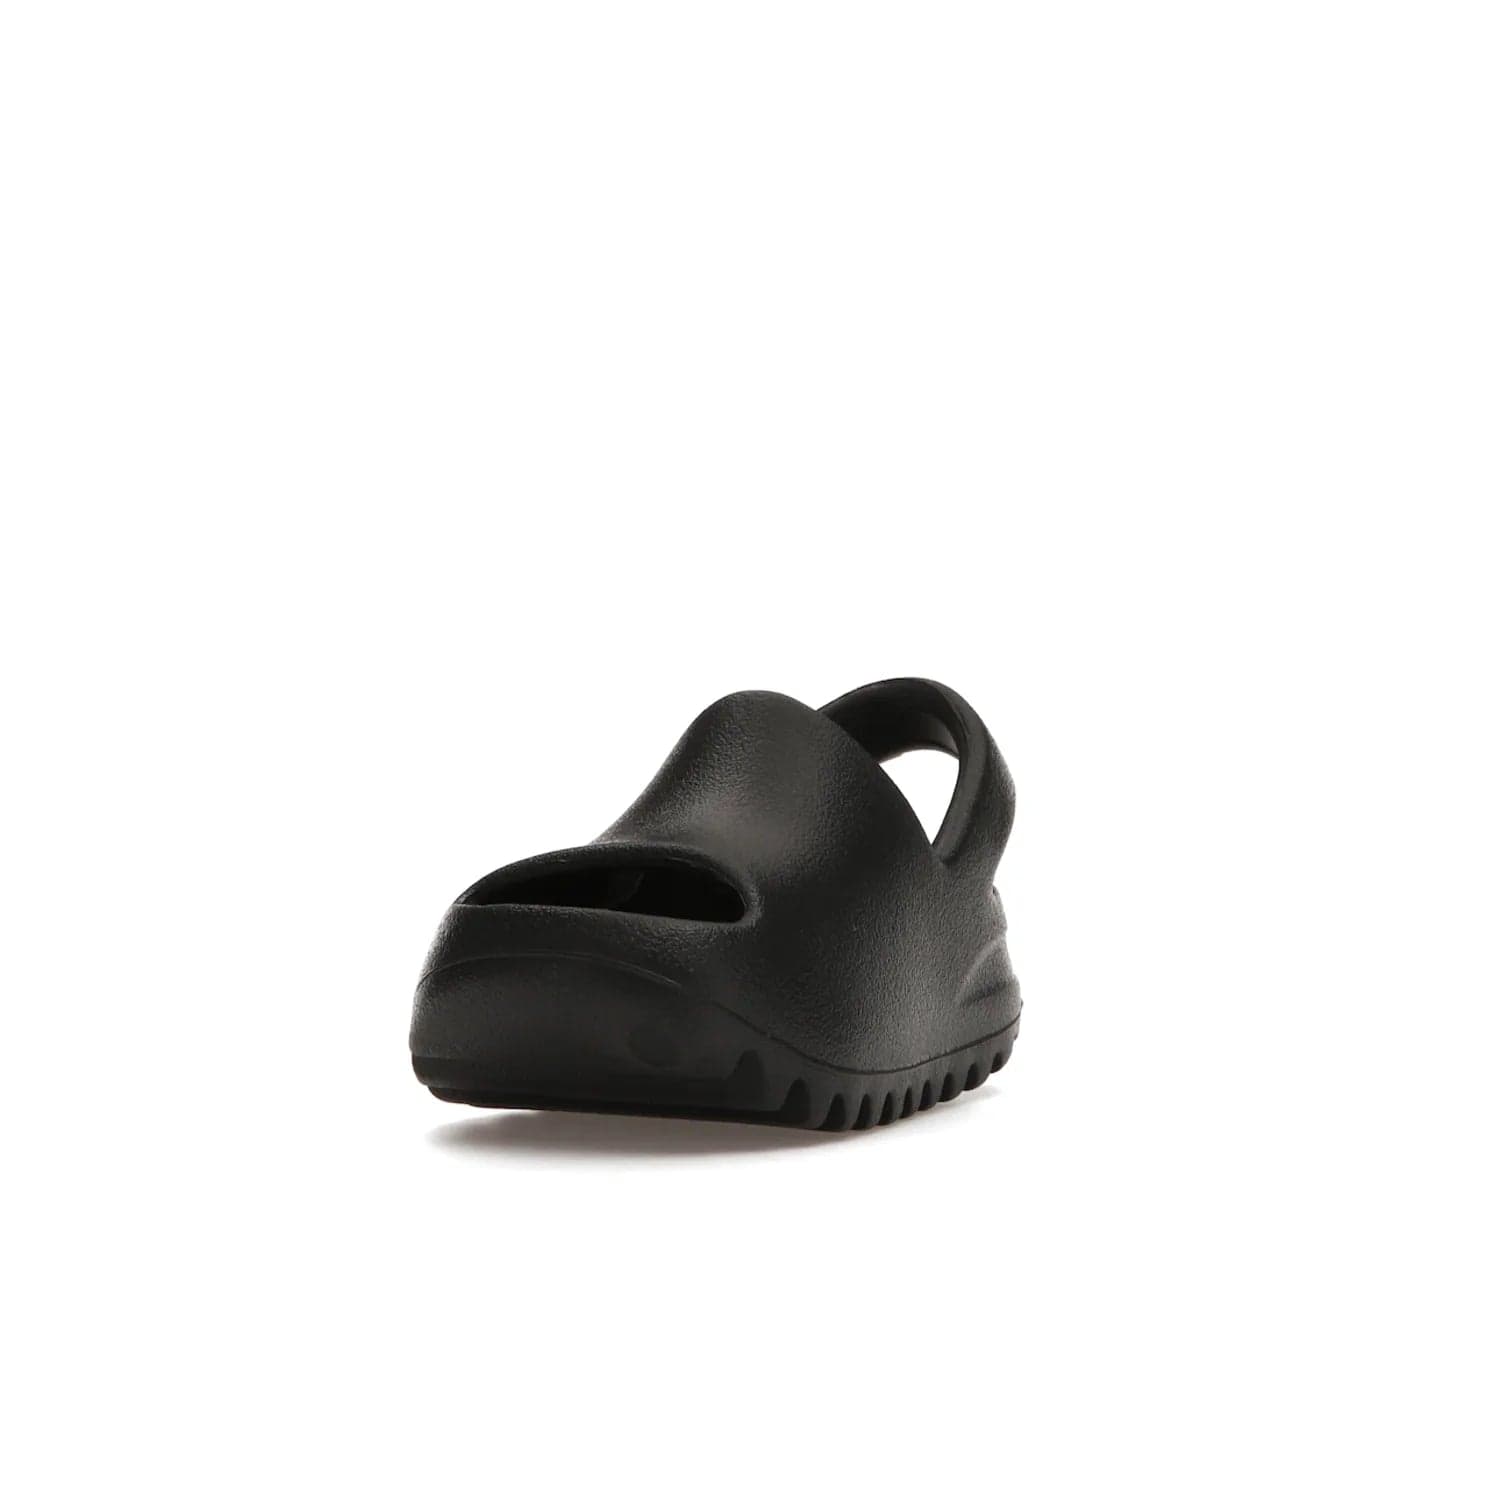 adidas Yeezy Slide Onyx (Infants) - Image 13 - Only at www.BallersClubKickz.com - The Adidas Yeezy Slide Onyx (Infant) is a classic silhouette with unique features and durable EVA foam. Released in May 2021 with a starting price of $70, it's no wonder it quickly gained popularity with its cool, minimalist look.